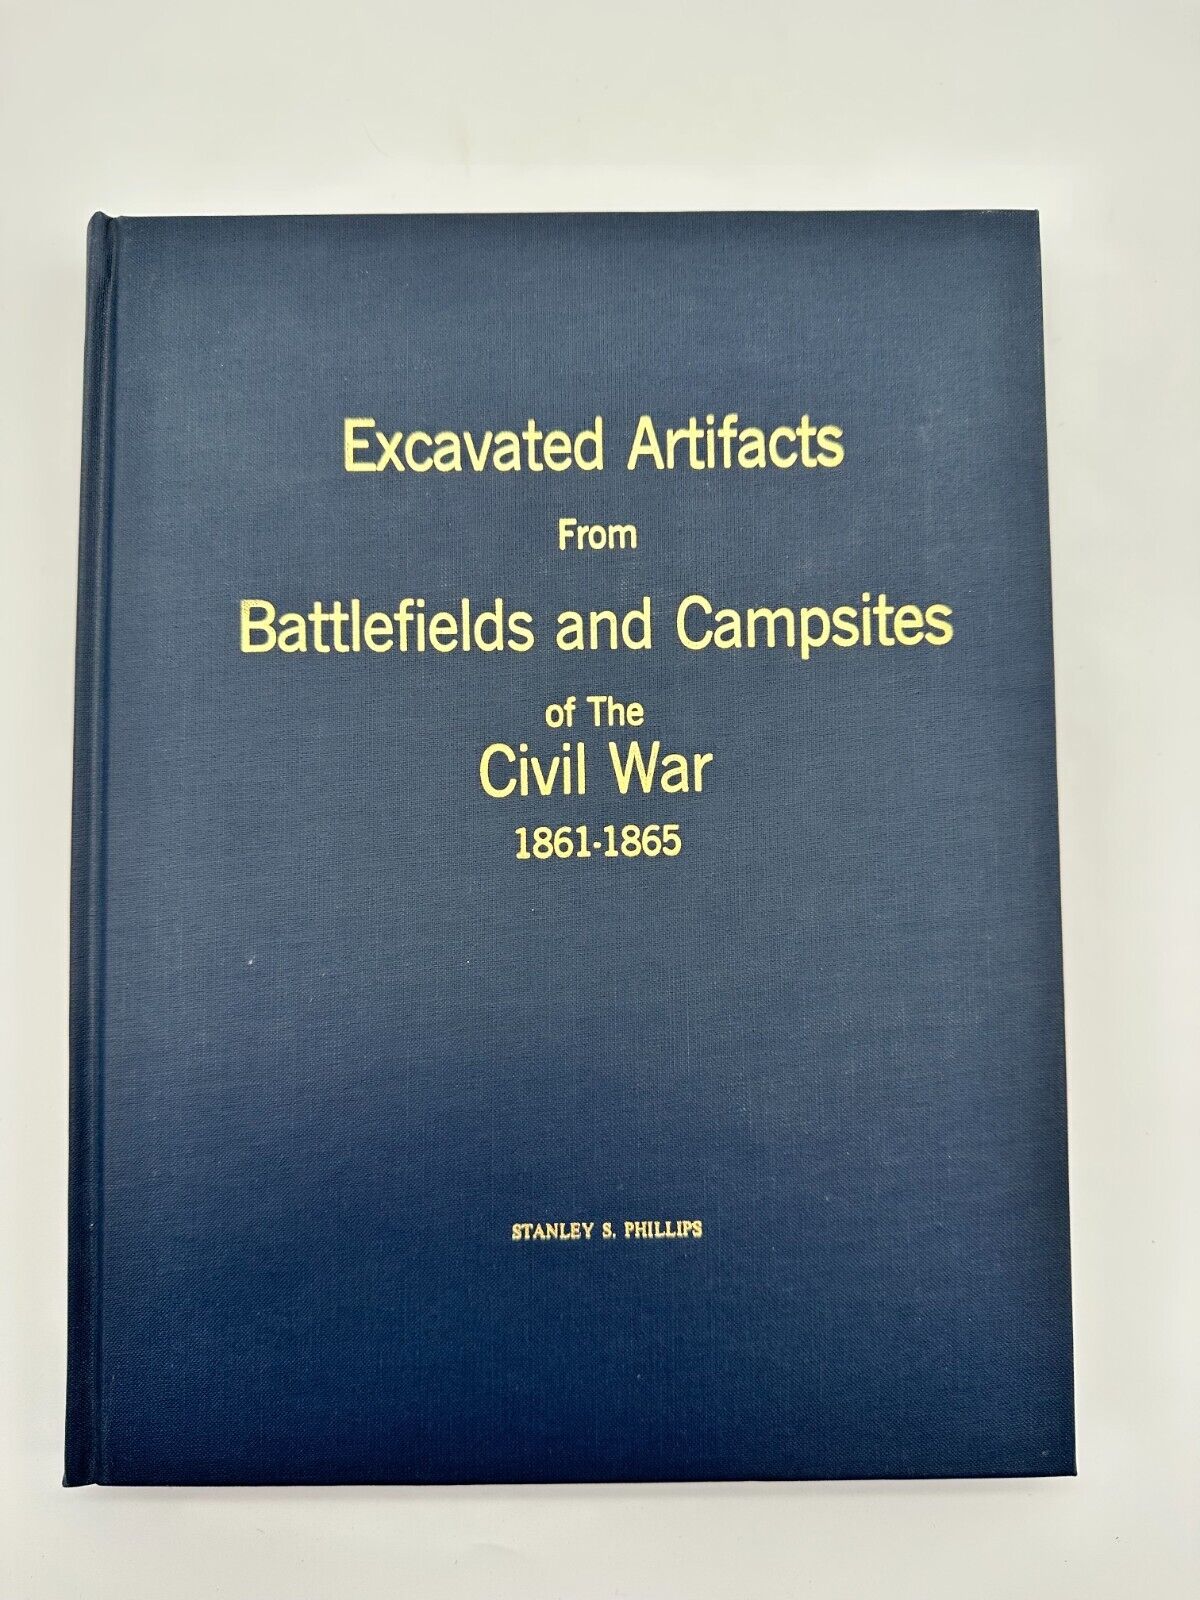 Excavated Artifacts from Battlefields and Campsites of the Civil War Phillips